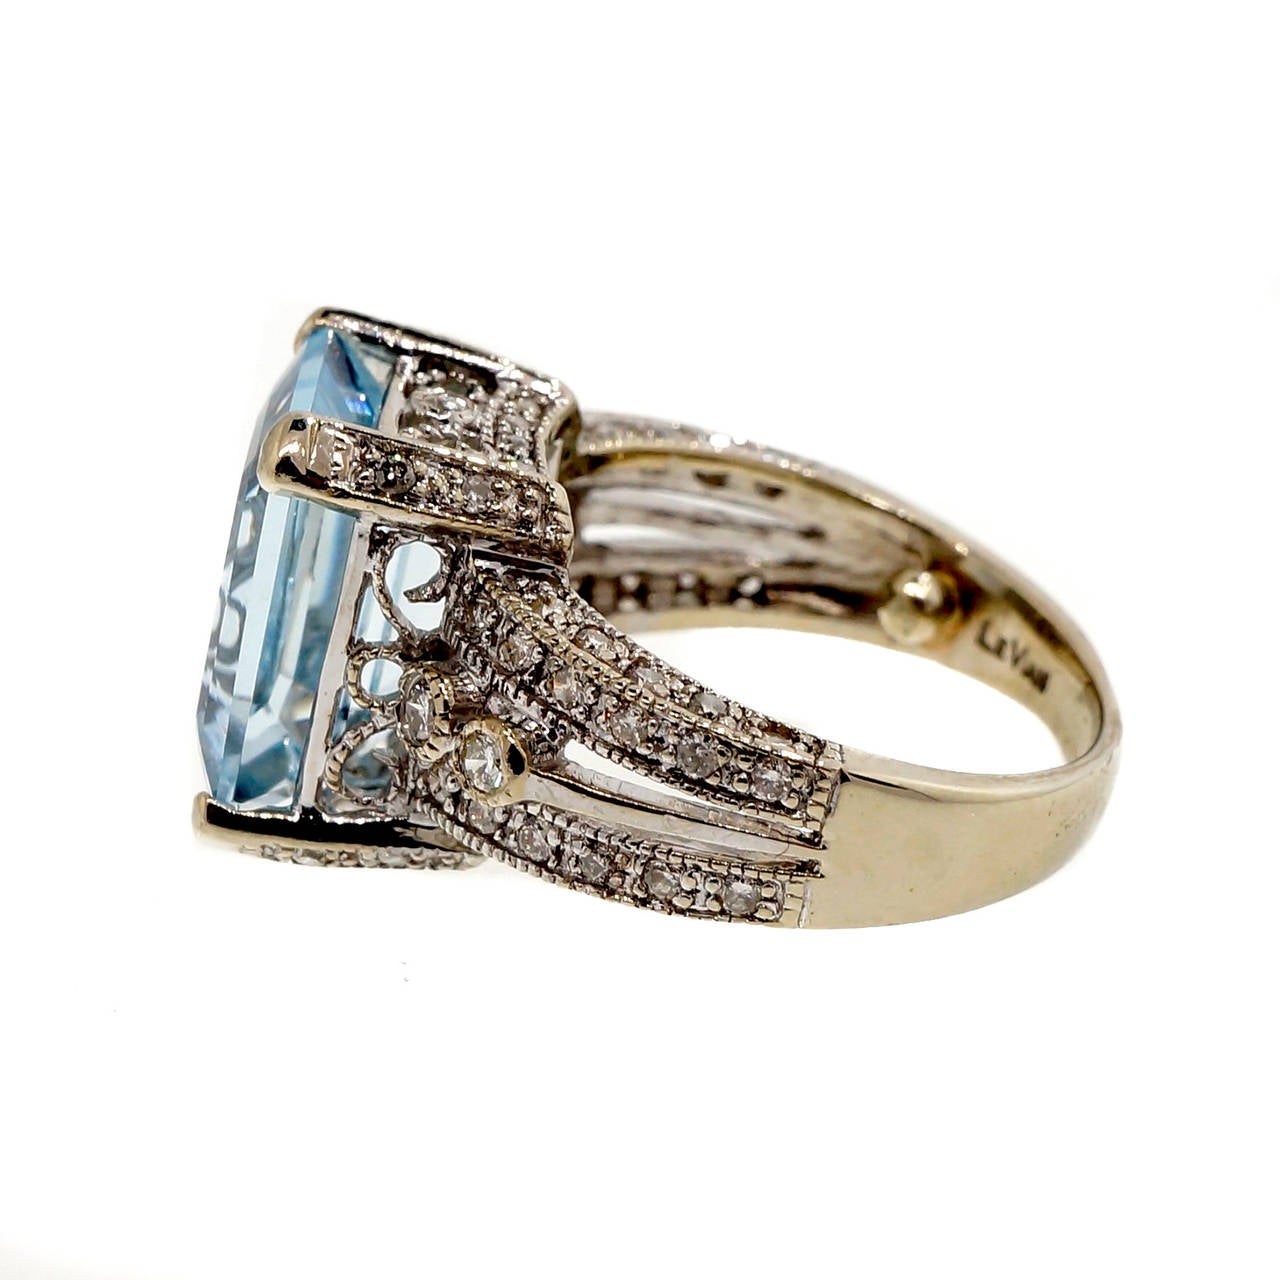 Le Vian 14k white gold ring with a beautiful well-polished genuine Aqua center and nice diamond accents.

1 emerald cut light greenish blue natural Aqua, approx. total weight 4.75cts, VS, 12 x 9.8mm
66 full cut diamonds, approx. total weight